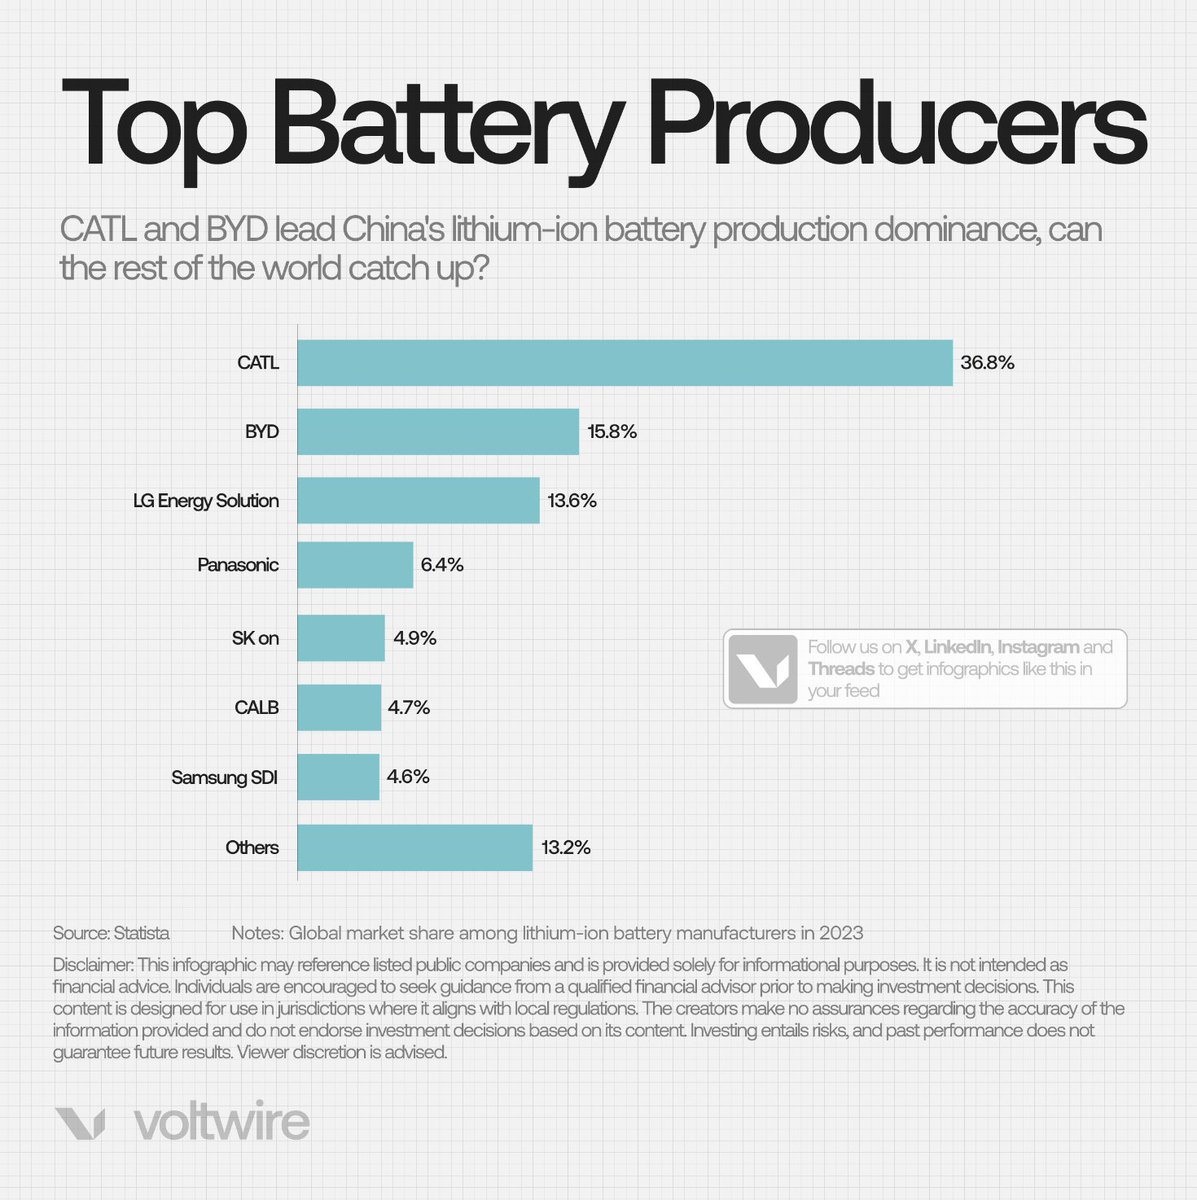 Battery producers🔋: The engine-room fuelling the future of e-mobility. 

#CATL 🇨🇳 and #BYD wont give up market share easily but South Korea 🇰🇷 and Japan 🇯🇵 will push ahead linking 🔗 Asia with the West.

#Lithiumionbattery #Lithium